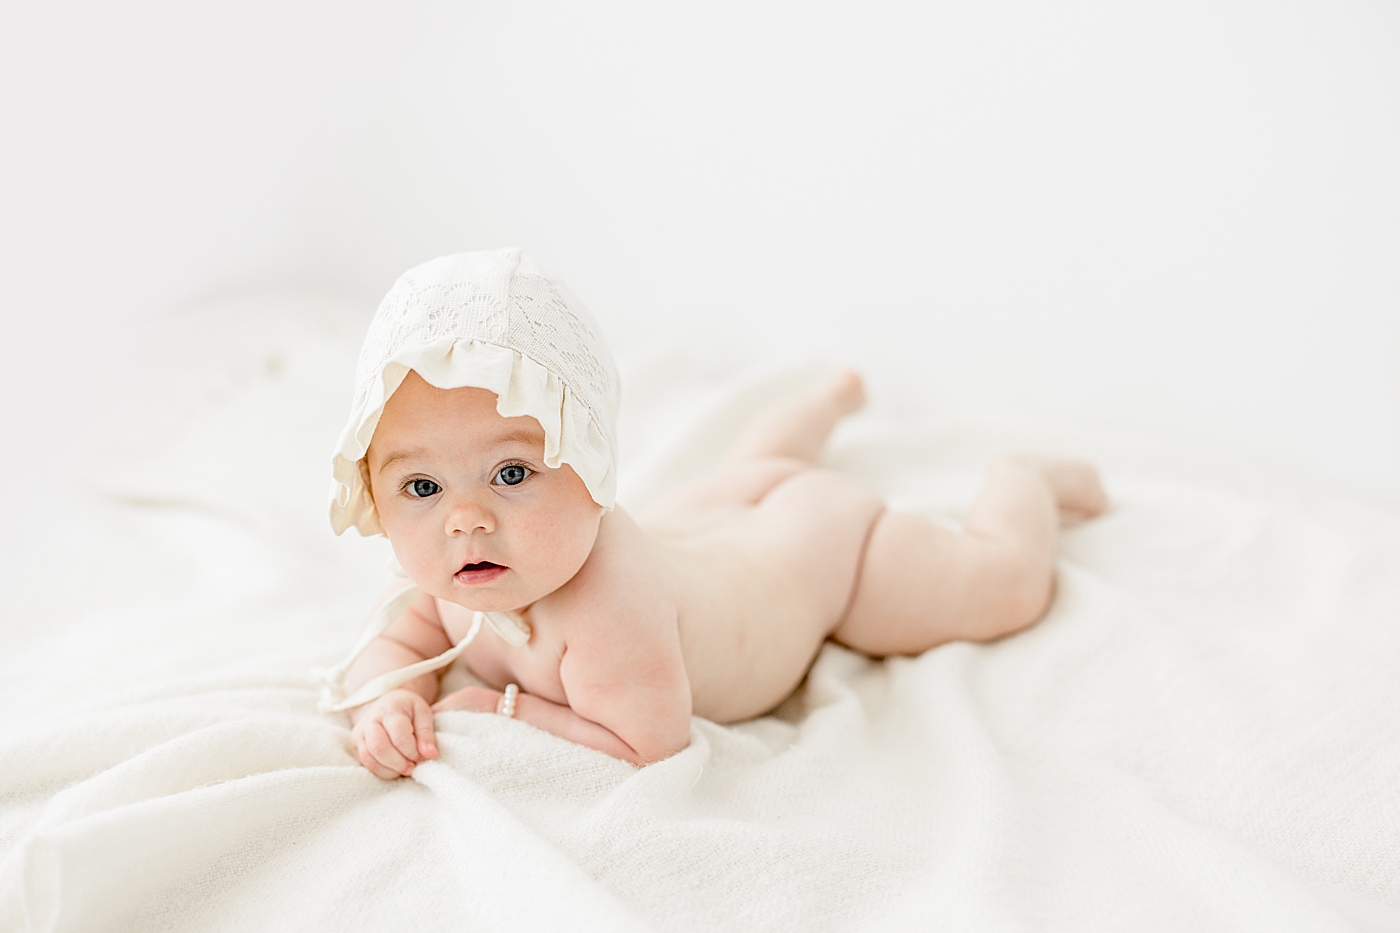 Six month old baby girl laying on her stomach. Photo by Brittany Elise Photography.